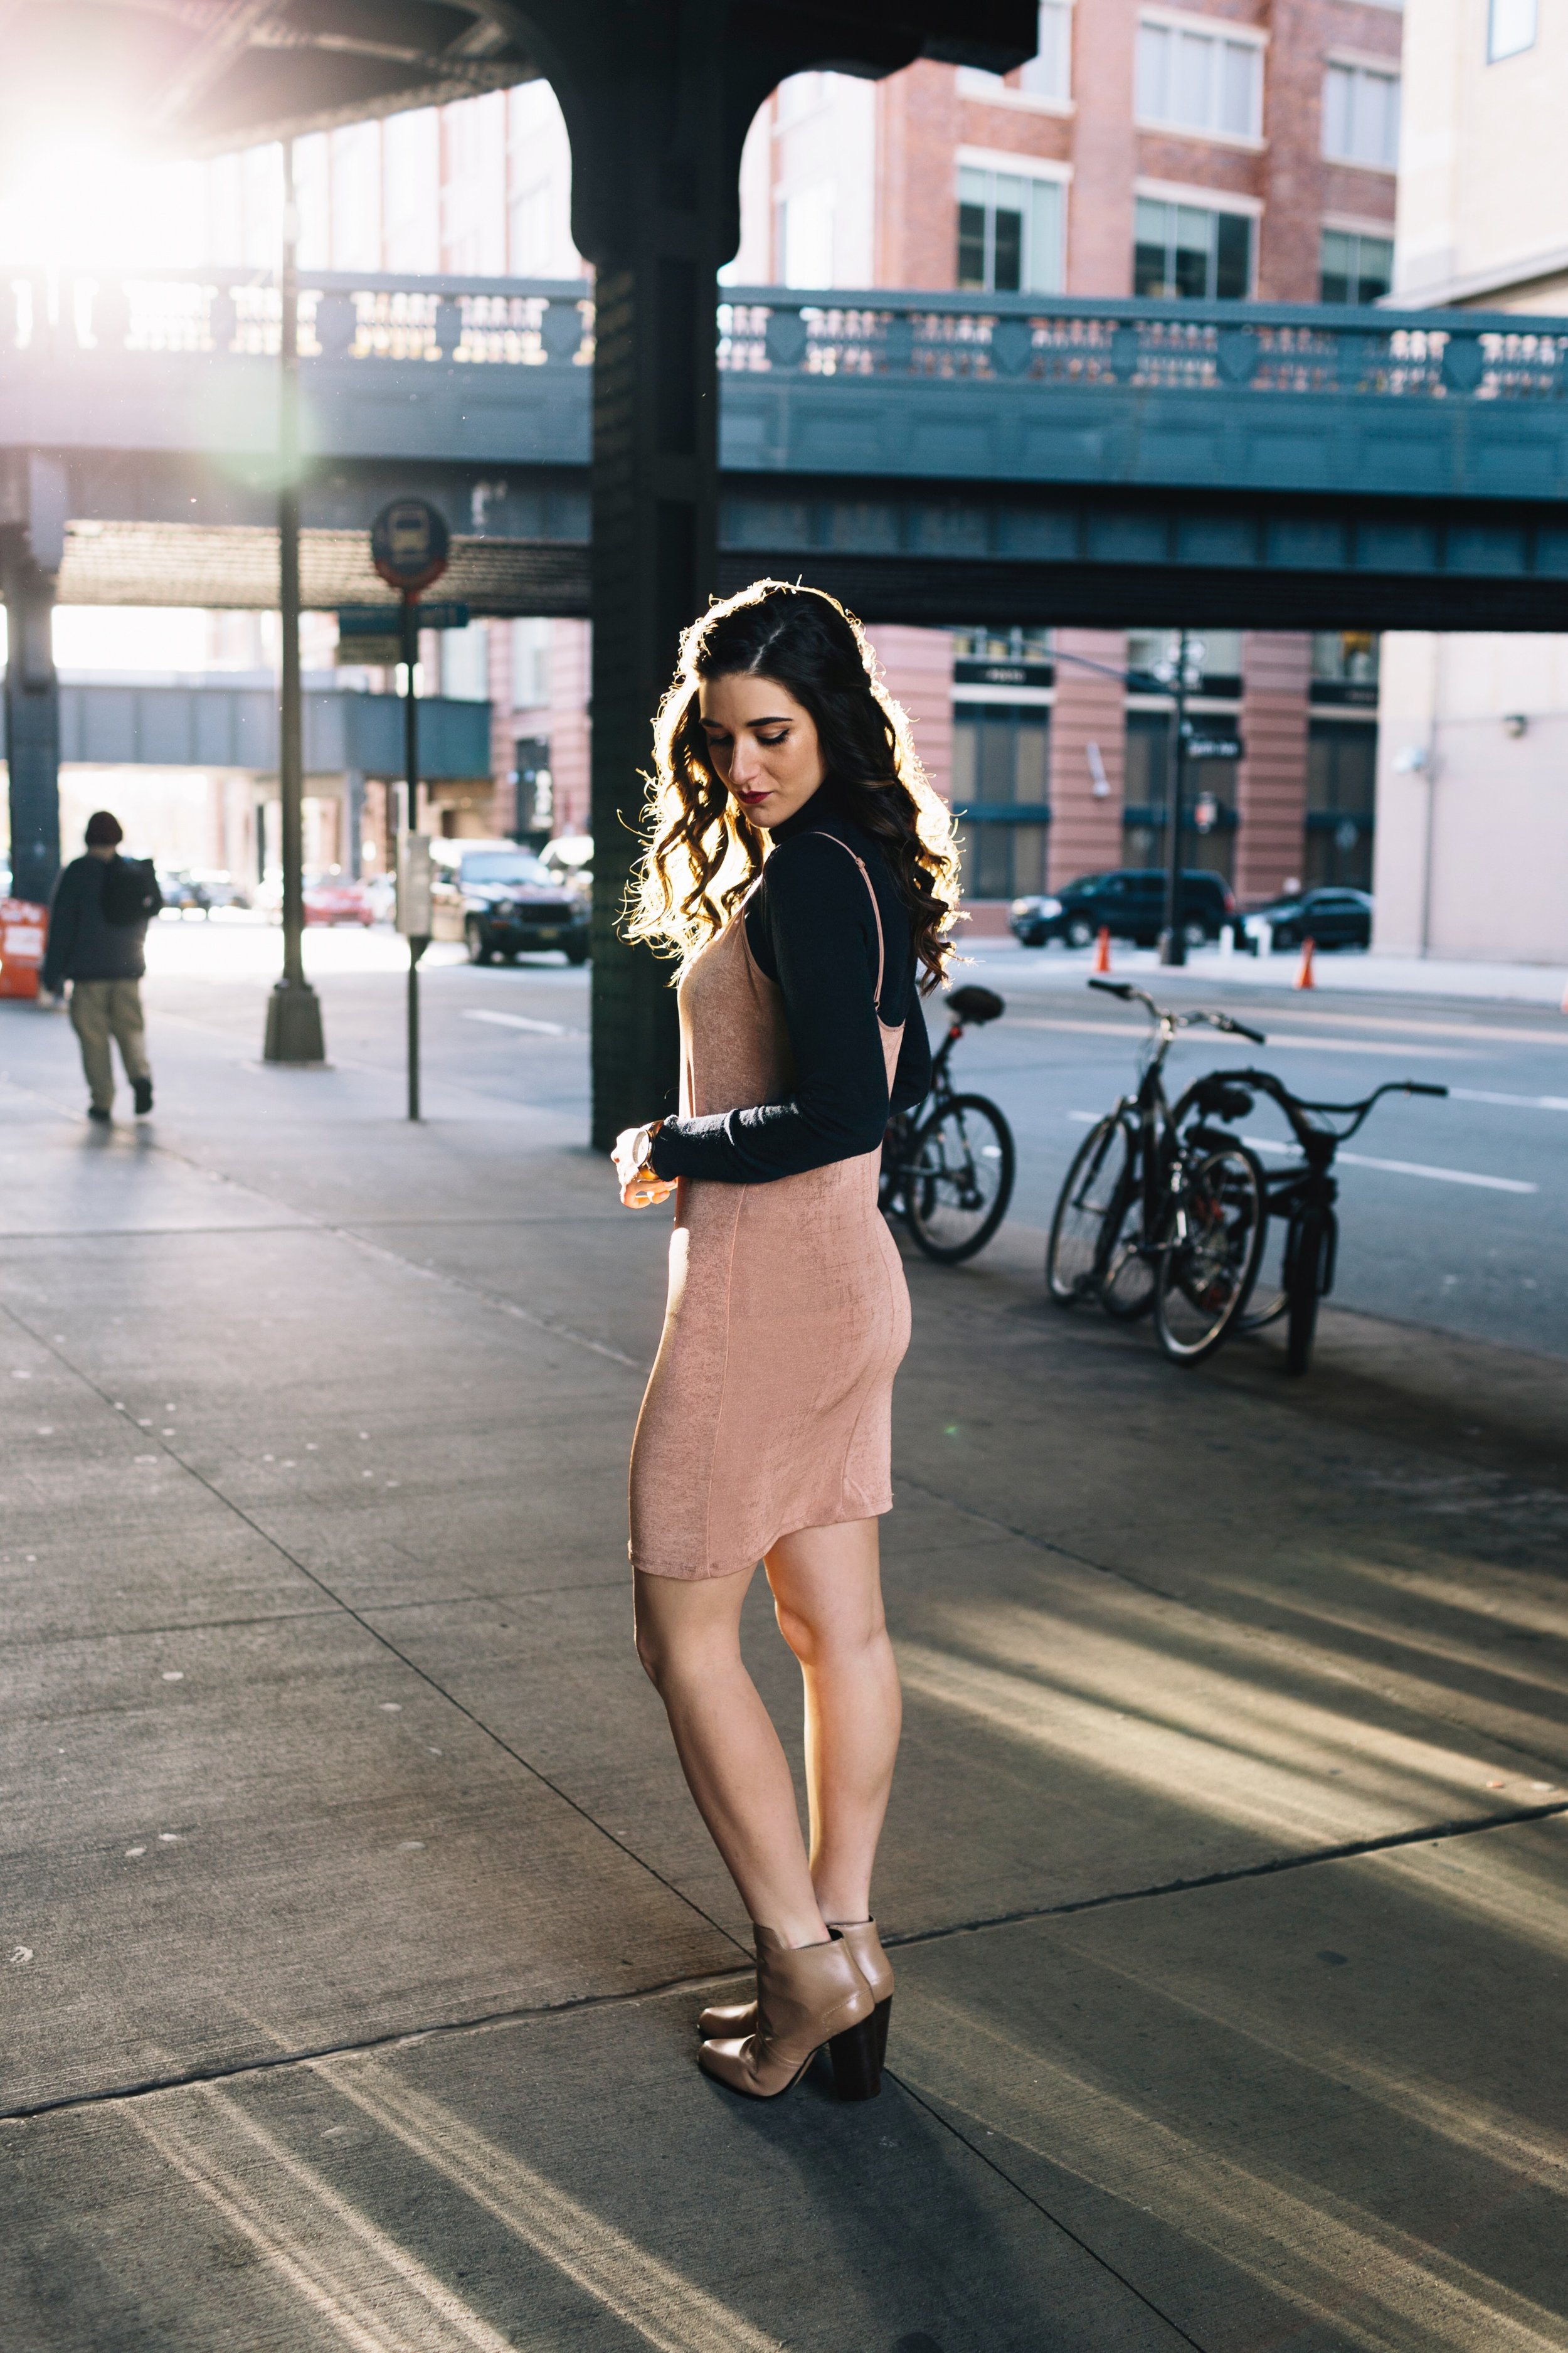 Navy Turtleneck + Pink Slip Dress Finding Your Niche Esther Santer Fashion Blog Louboutins & Love NYC Street Style Blogger Outfit OOTD Trendy Booties Shoes Hair Girl Women Winter Look Shopping Zara M4D3 Banana Republic Photoshoot New York City Shirt.JPG